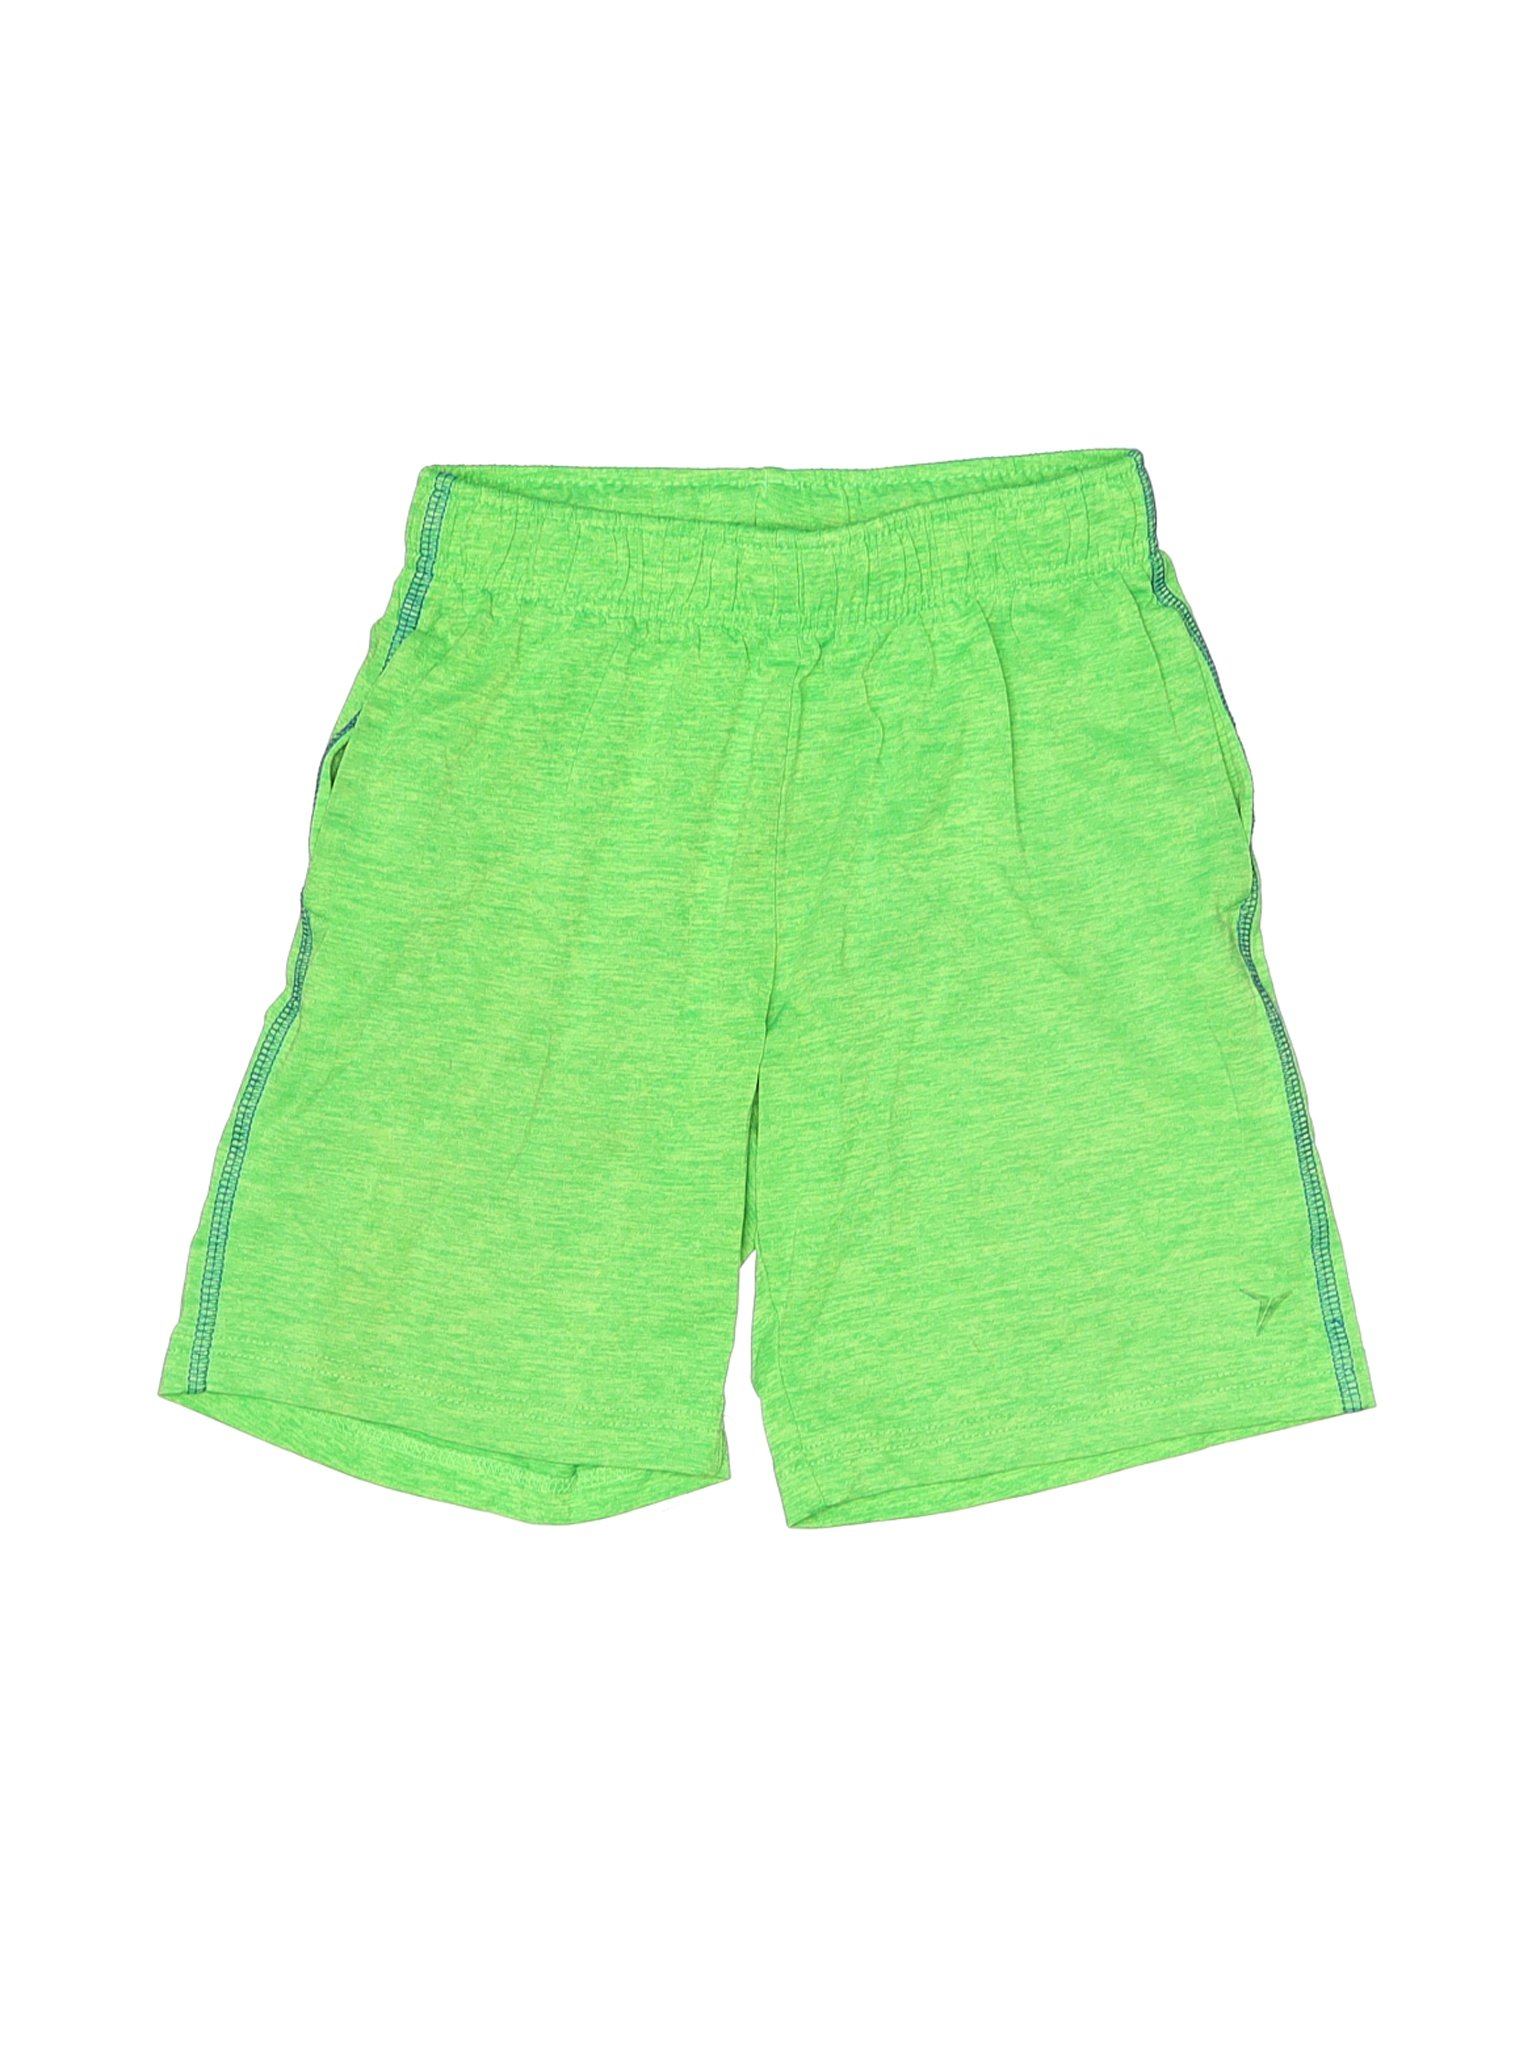 Active by Old Navy Boys Green Athletic Shorts 6 | eBay